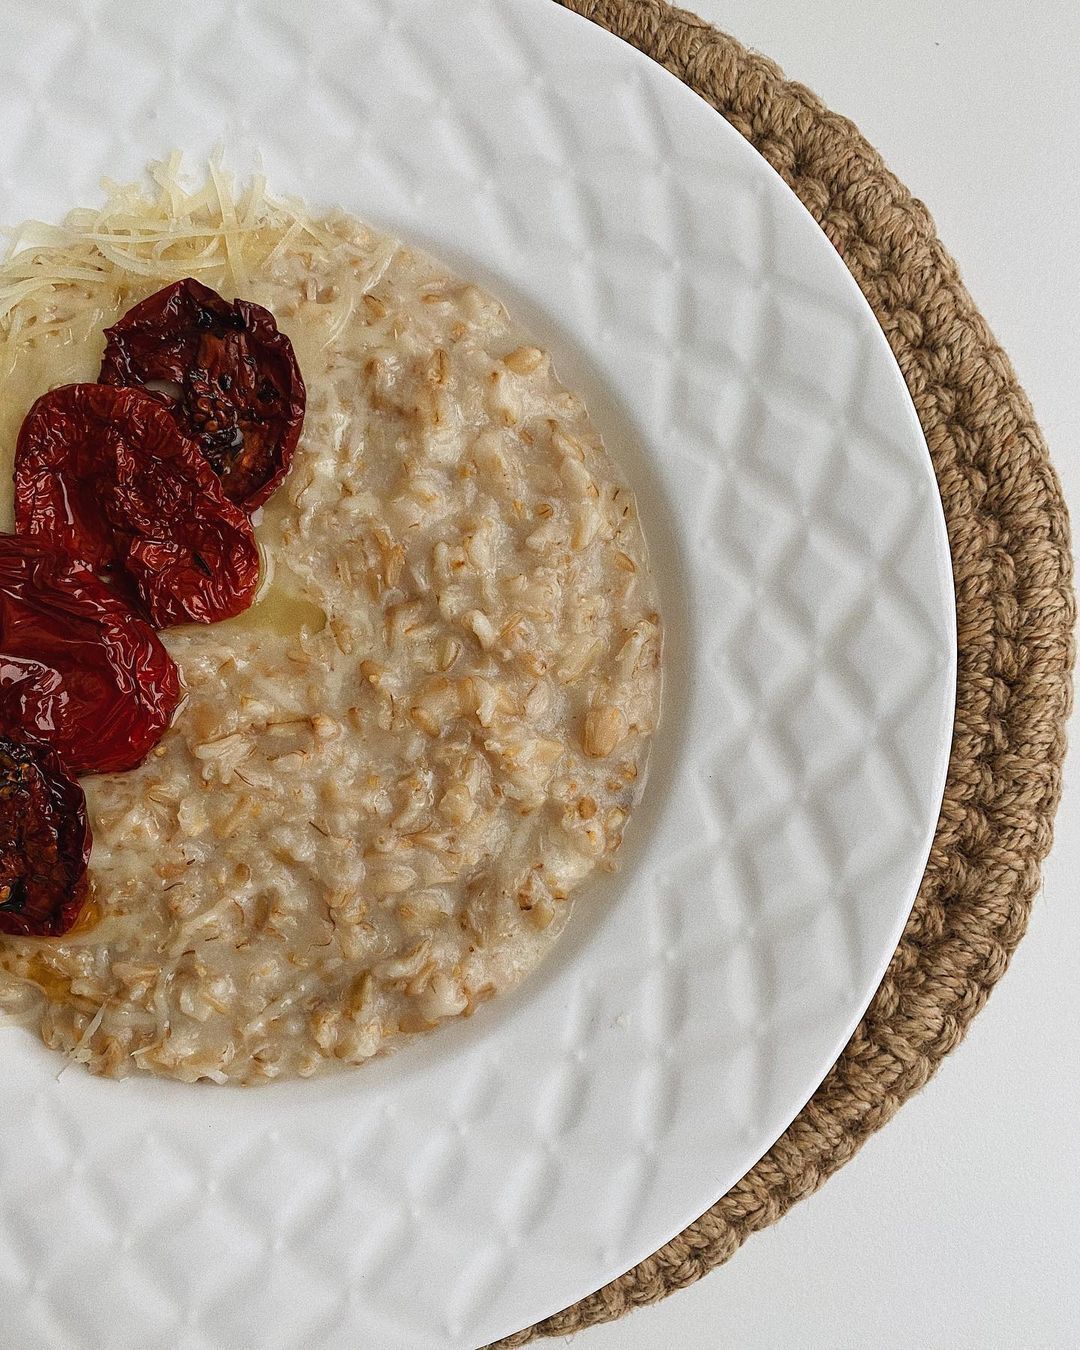 Oatmeal with sun-dried tomatoes